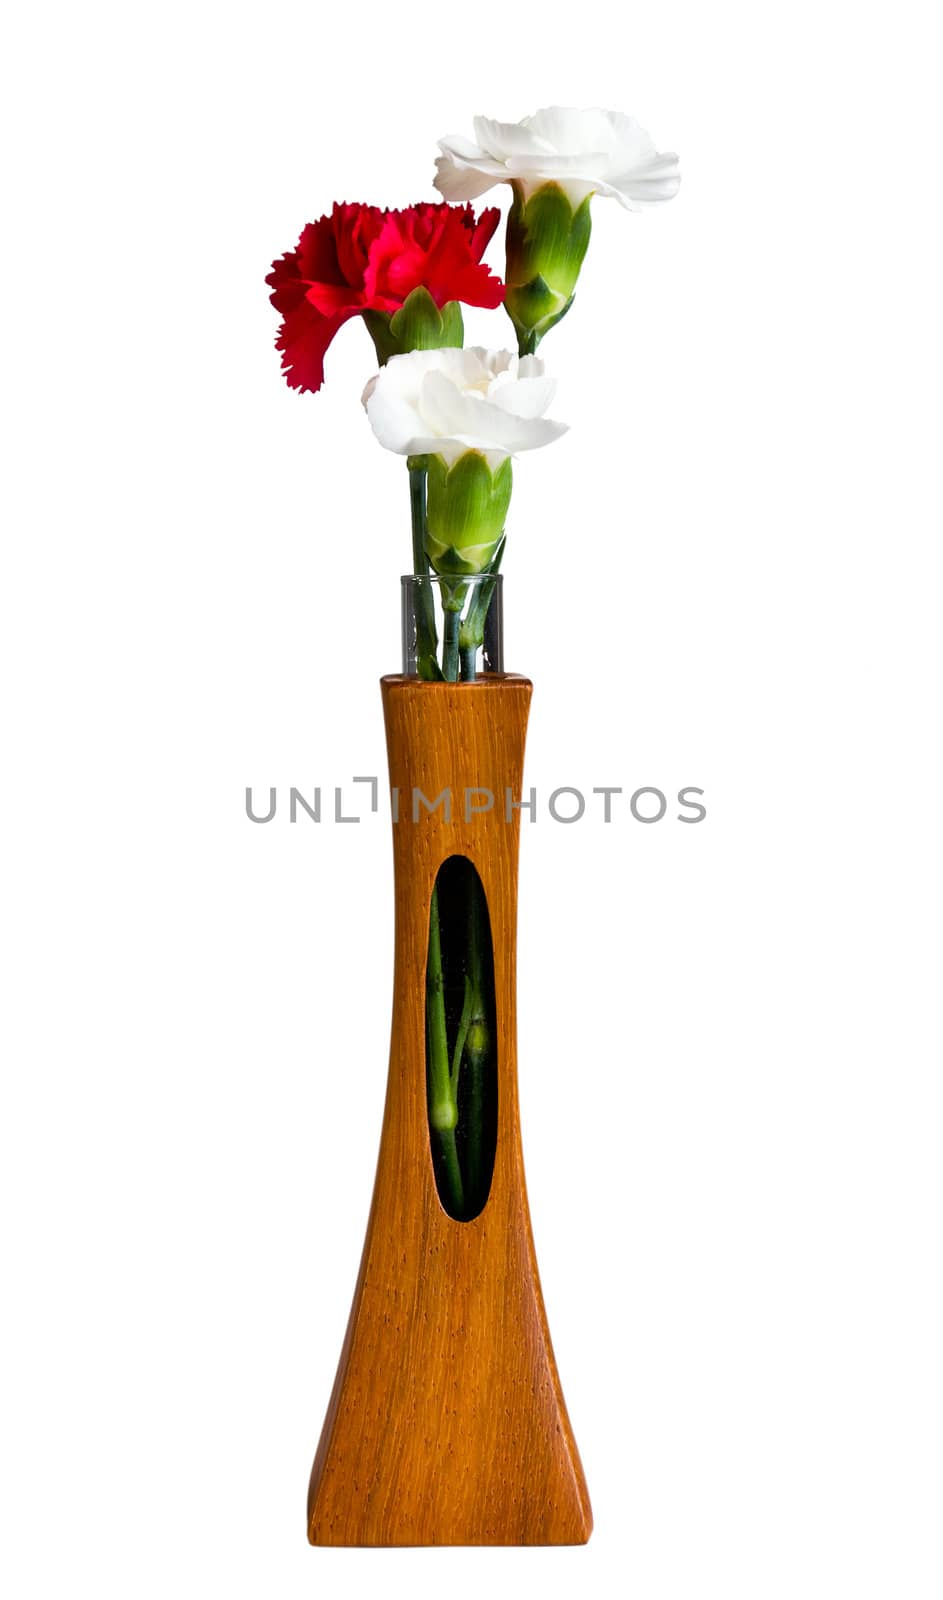 Single red and two white spray carnation blossoms in a carved teak vase with unique opening showing the stem